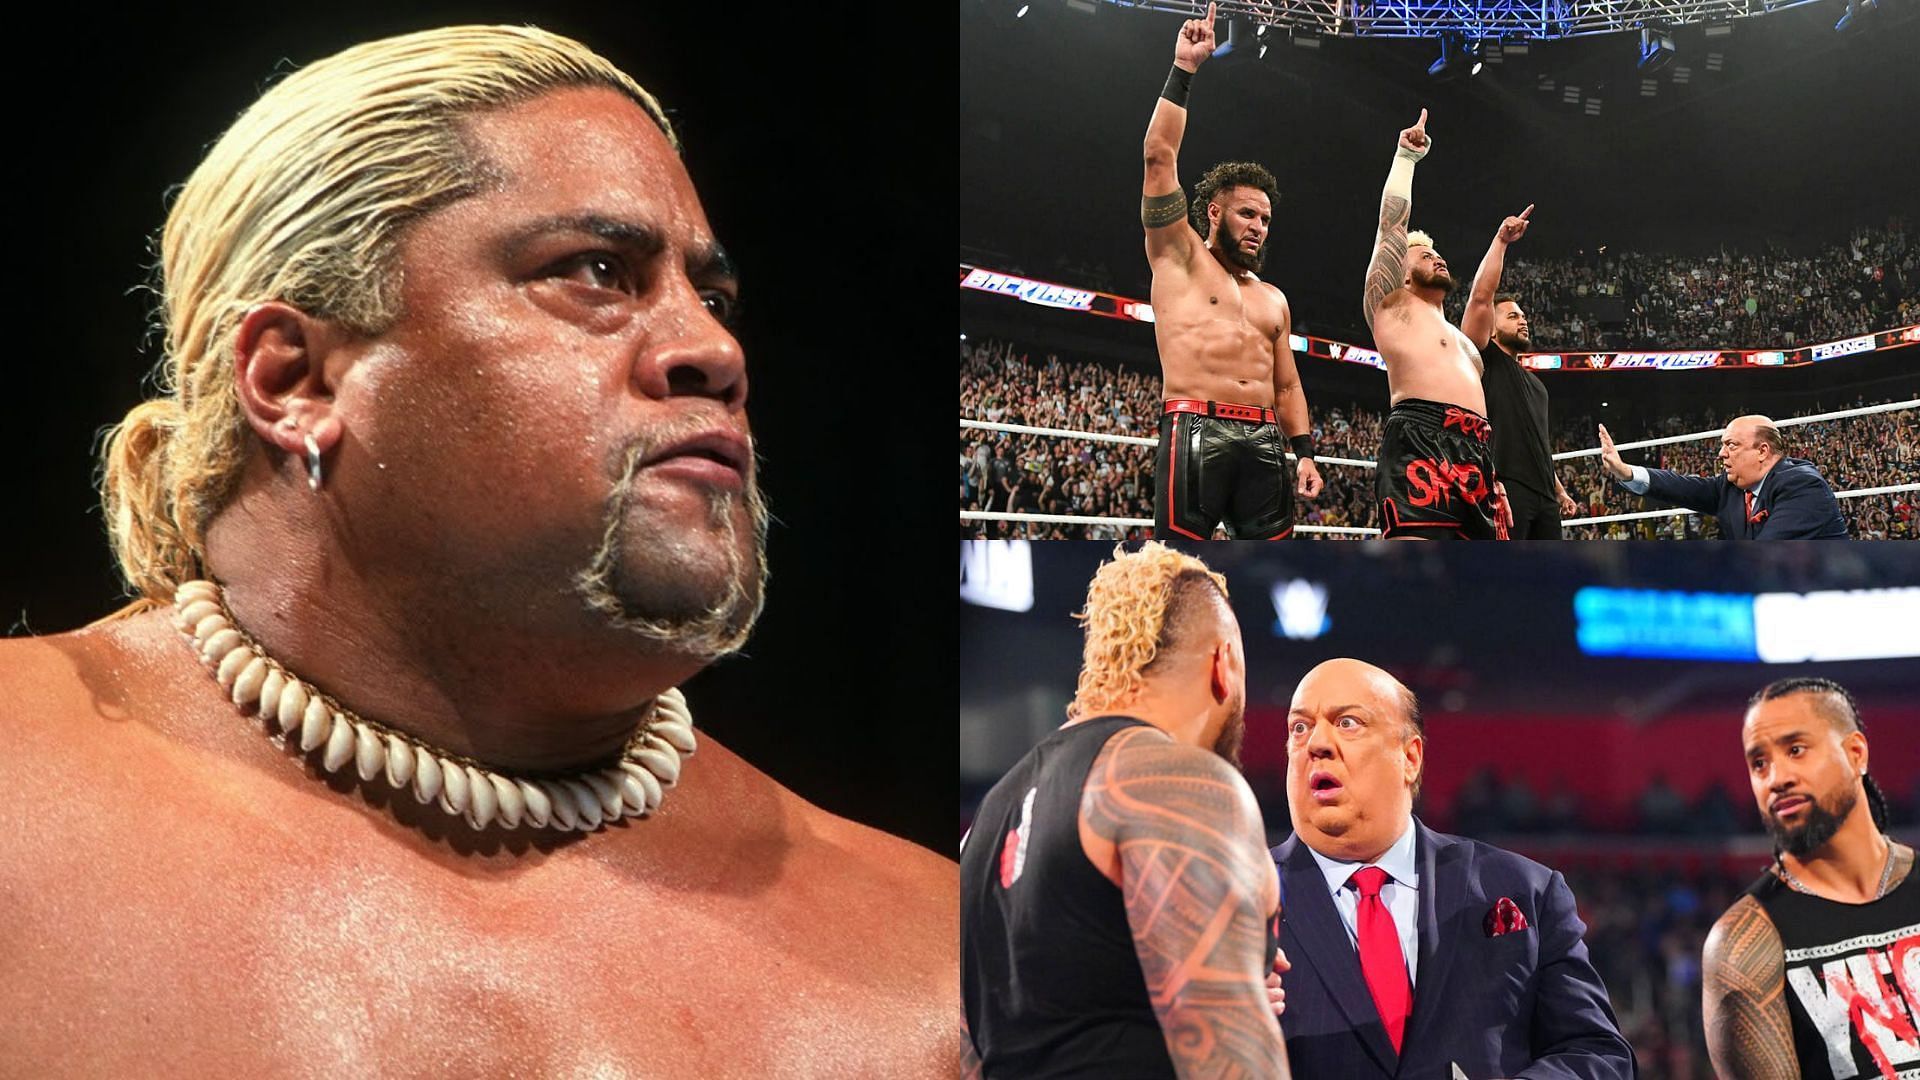 Rikishi (left) and The Bloodline (right)